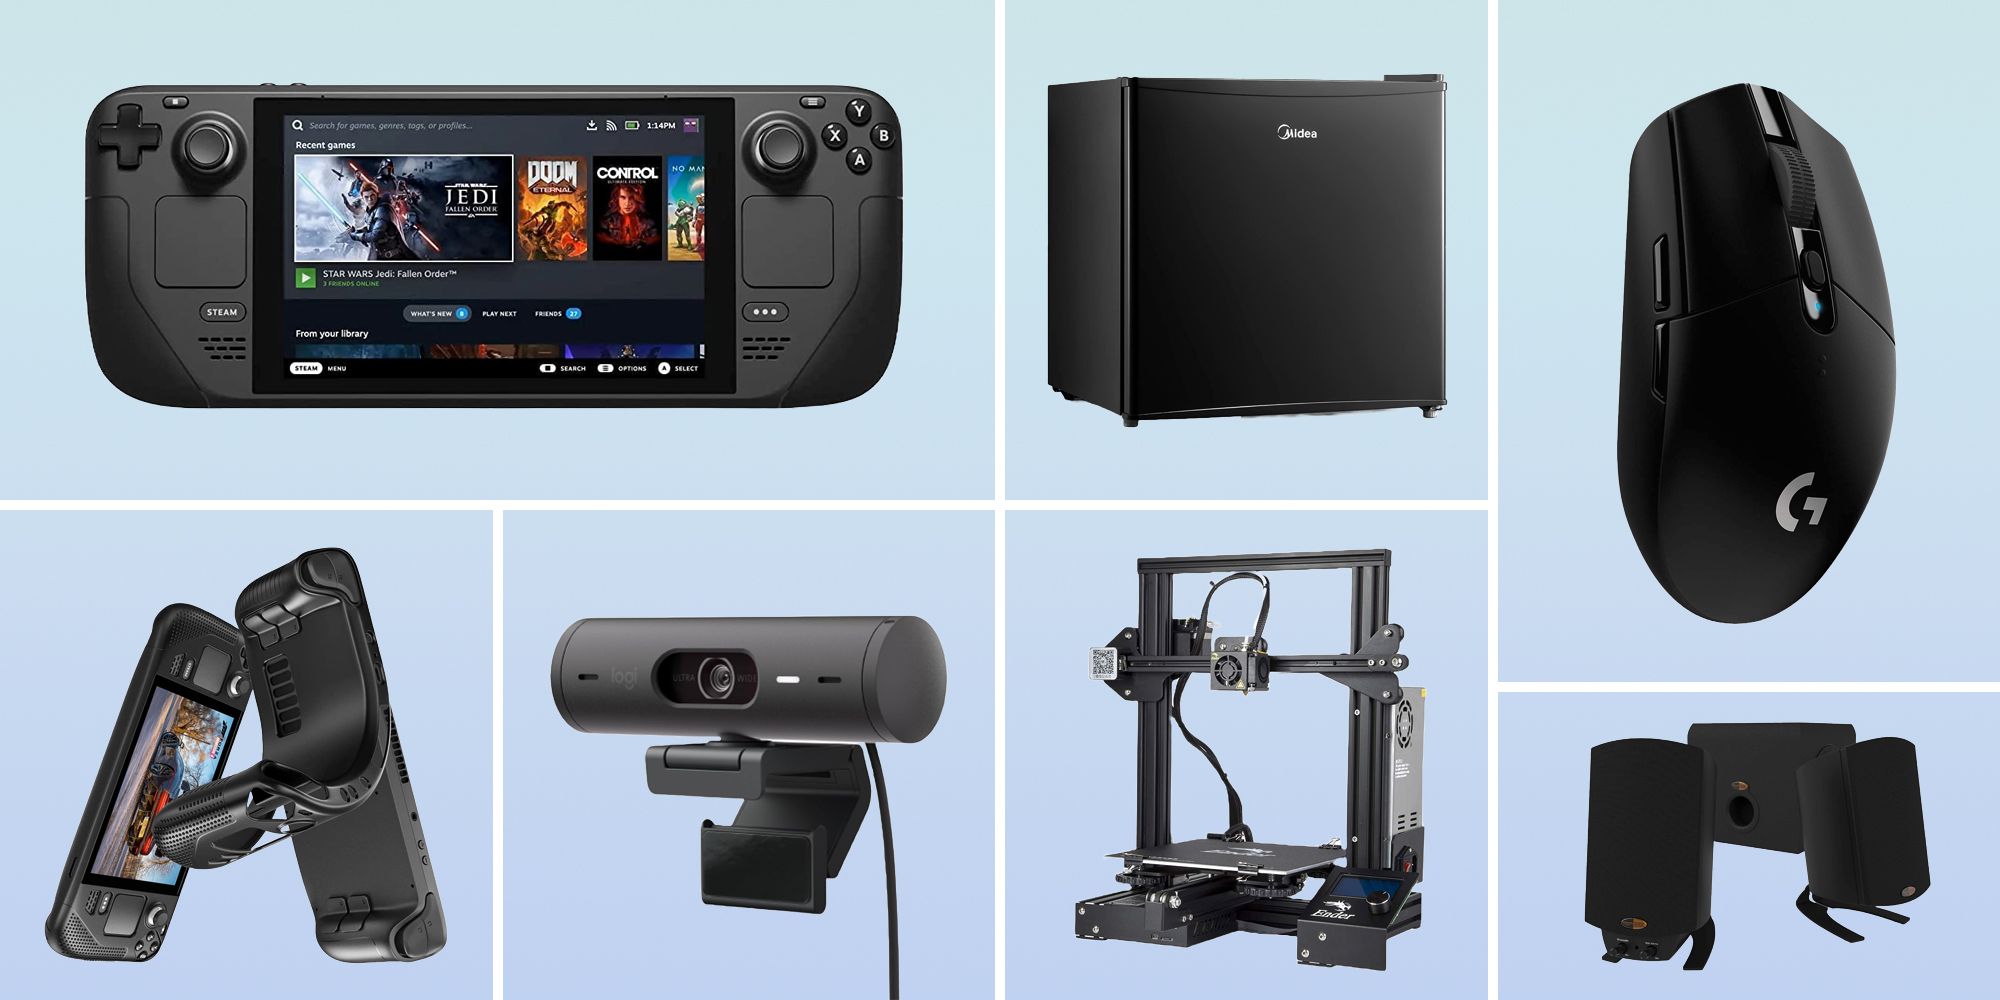 6 Best Gifts for Gamers: Latest Tech Gift Ideas in 2021 - The Best